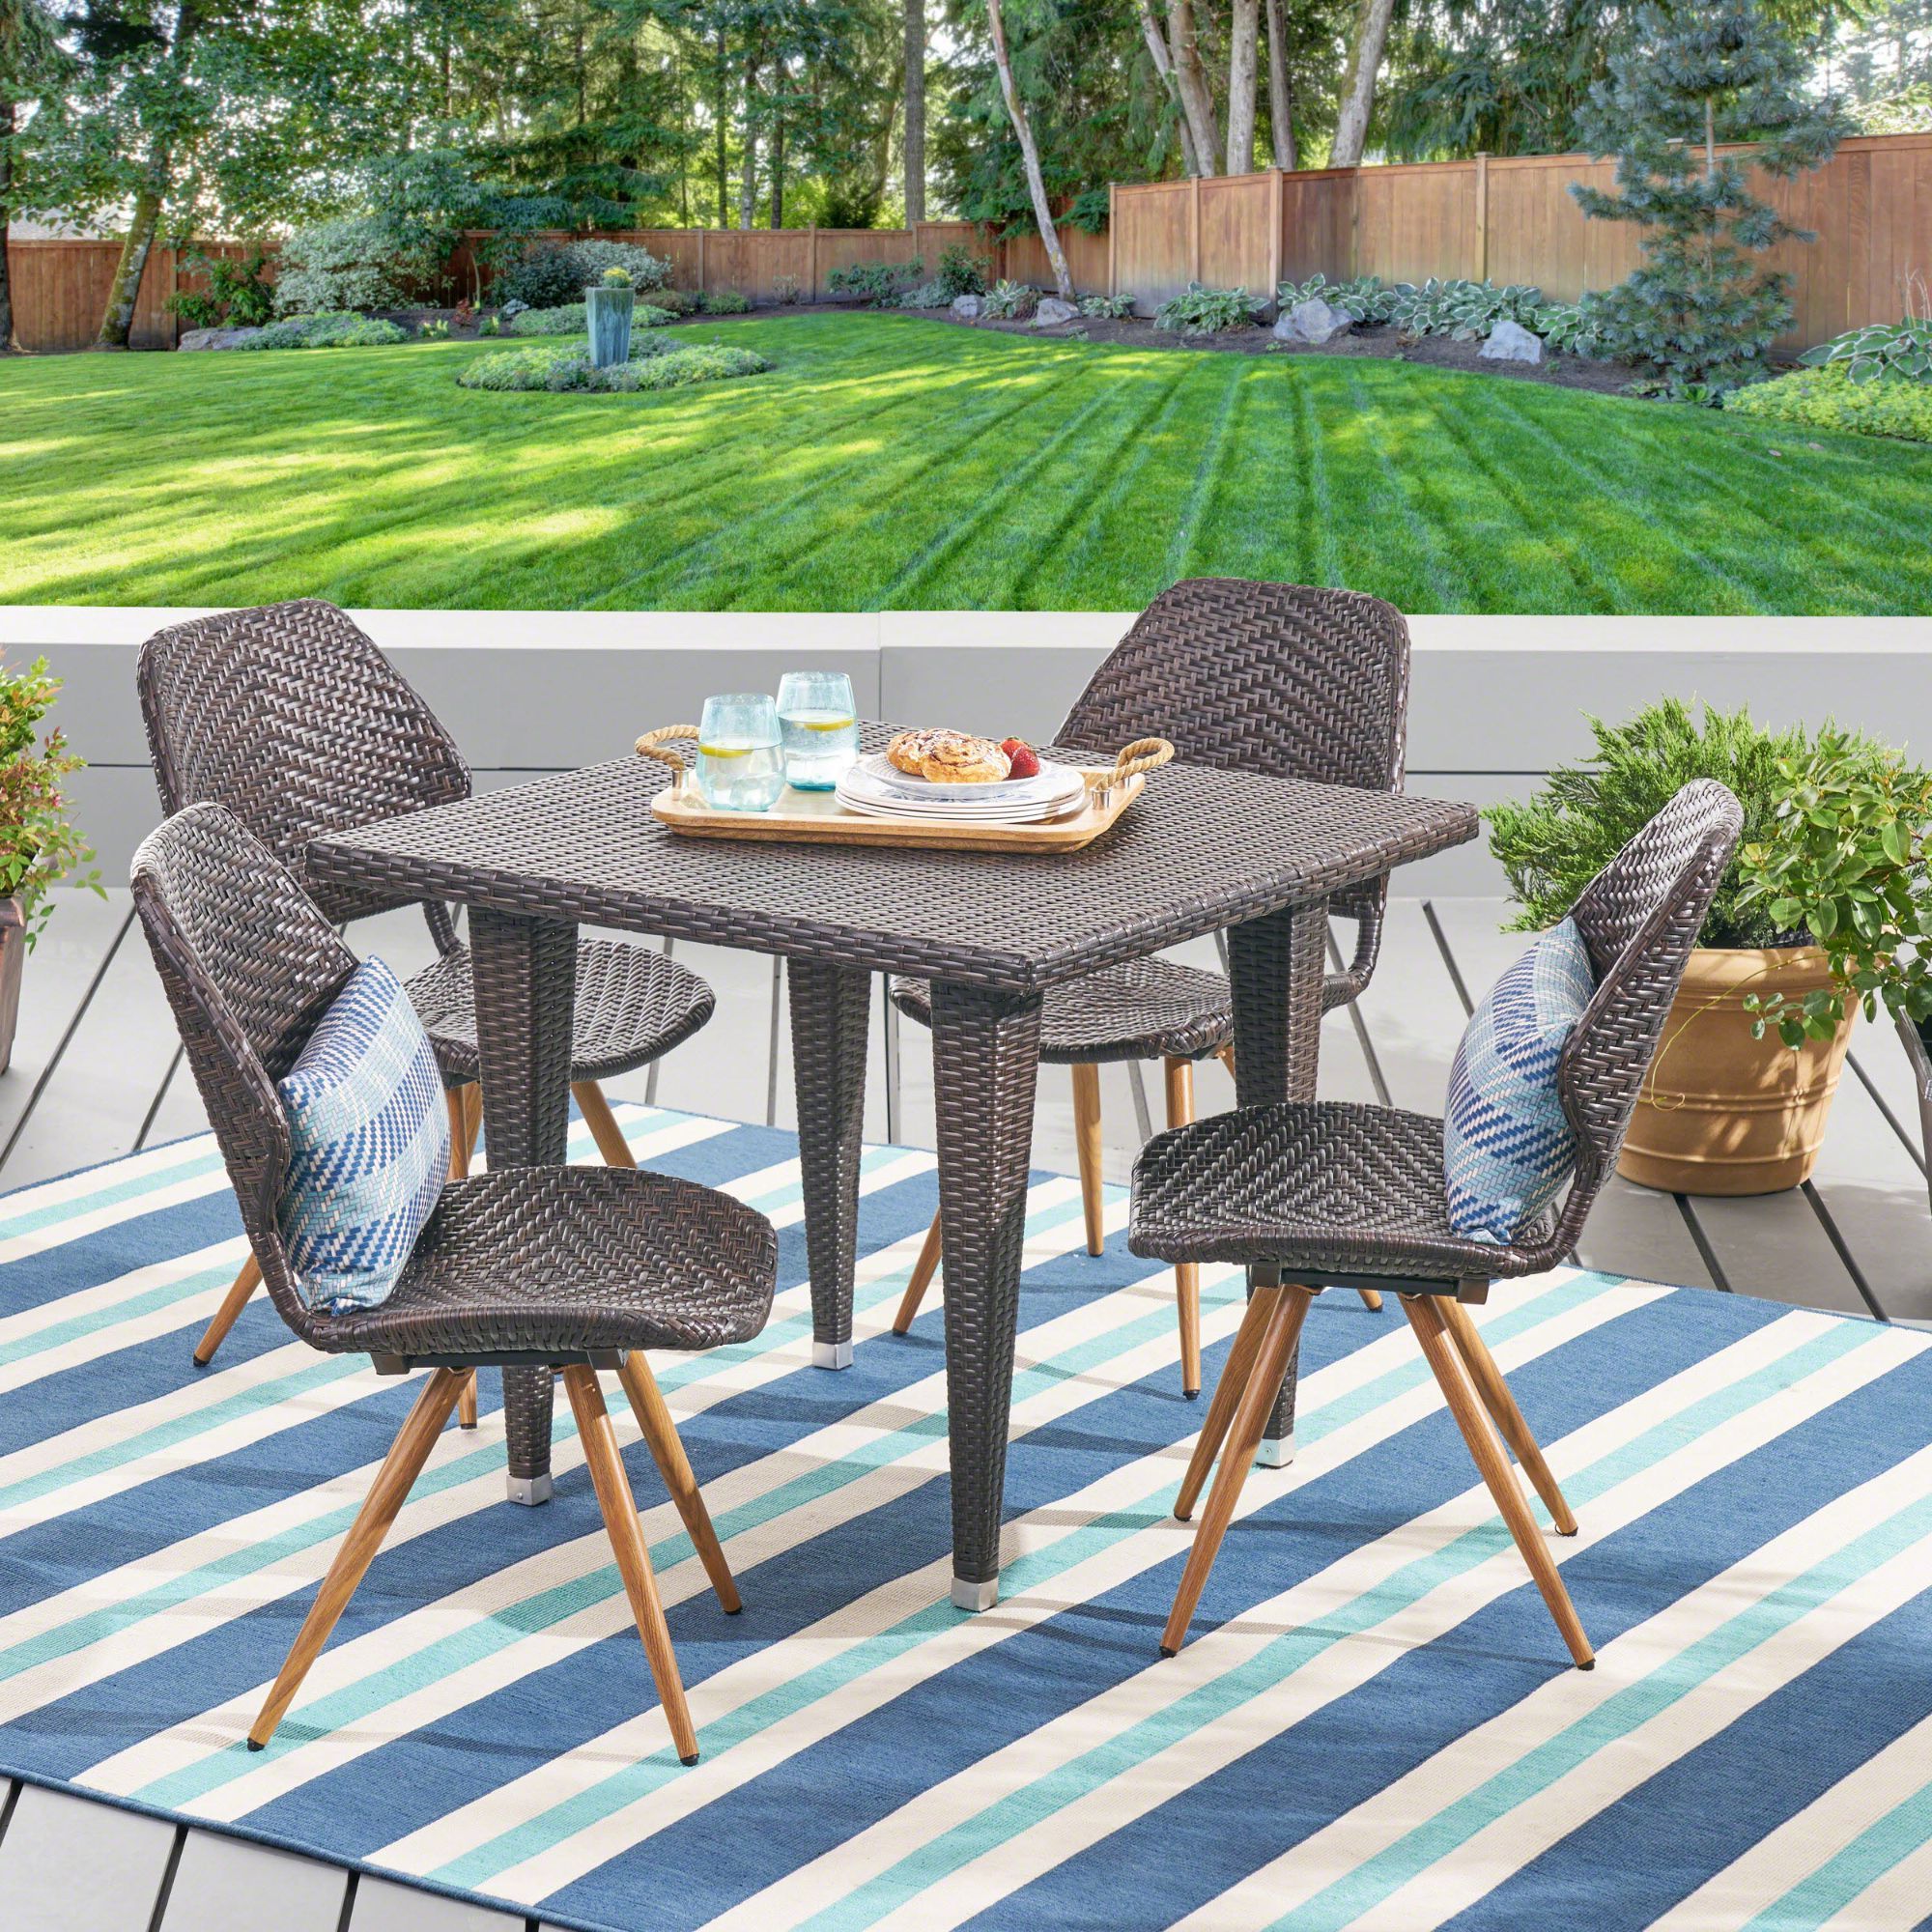 5 Piece Brown Finish Square Wicker Outdoor Furniture Patio Dining Set Regarding Popular 5 Piece Patio Sets (View 3 of 15)